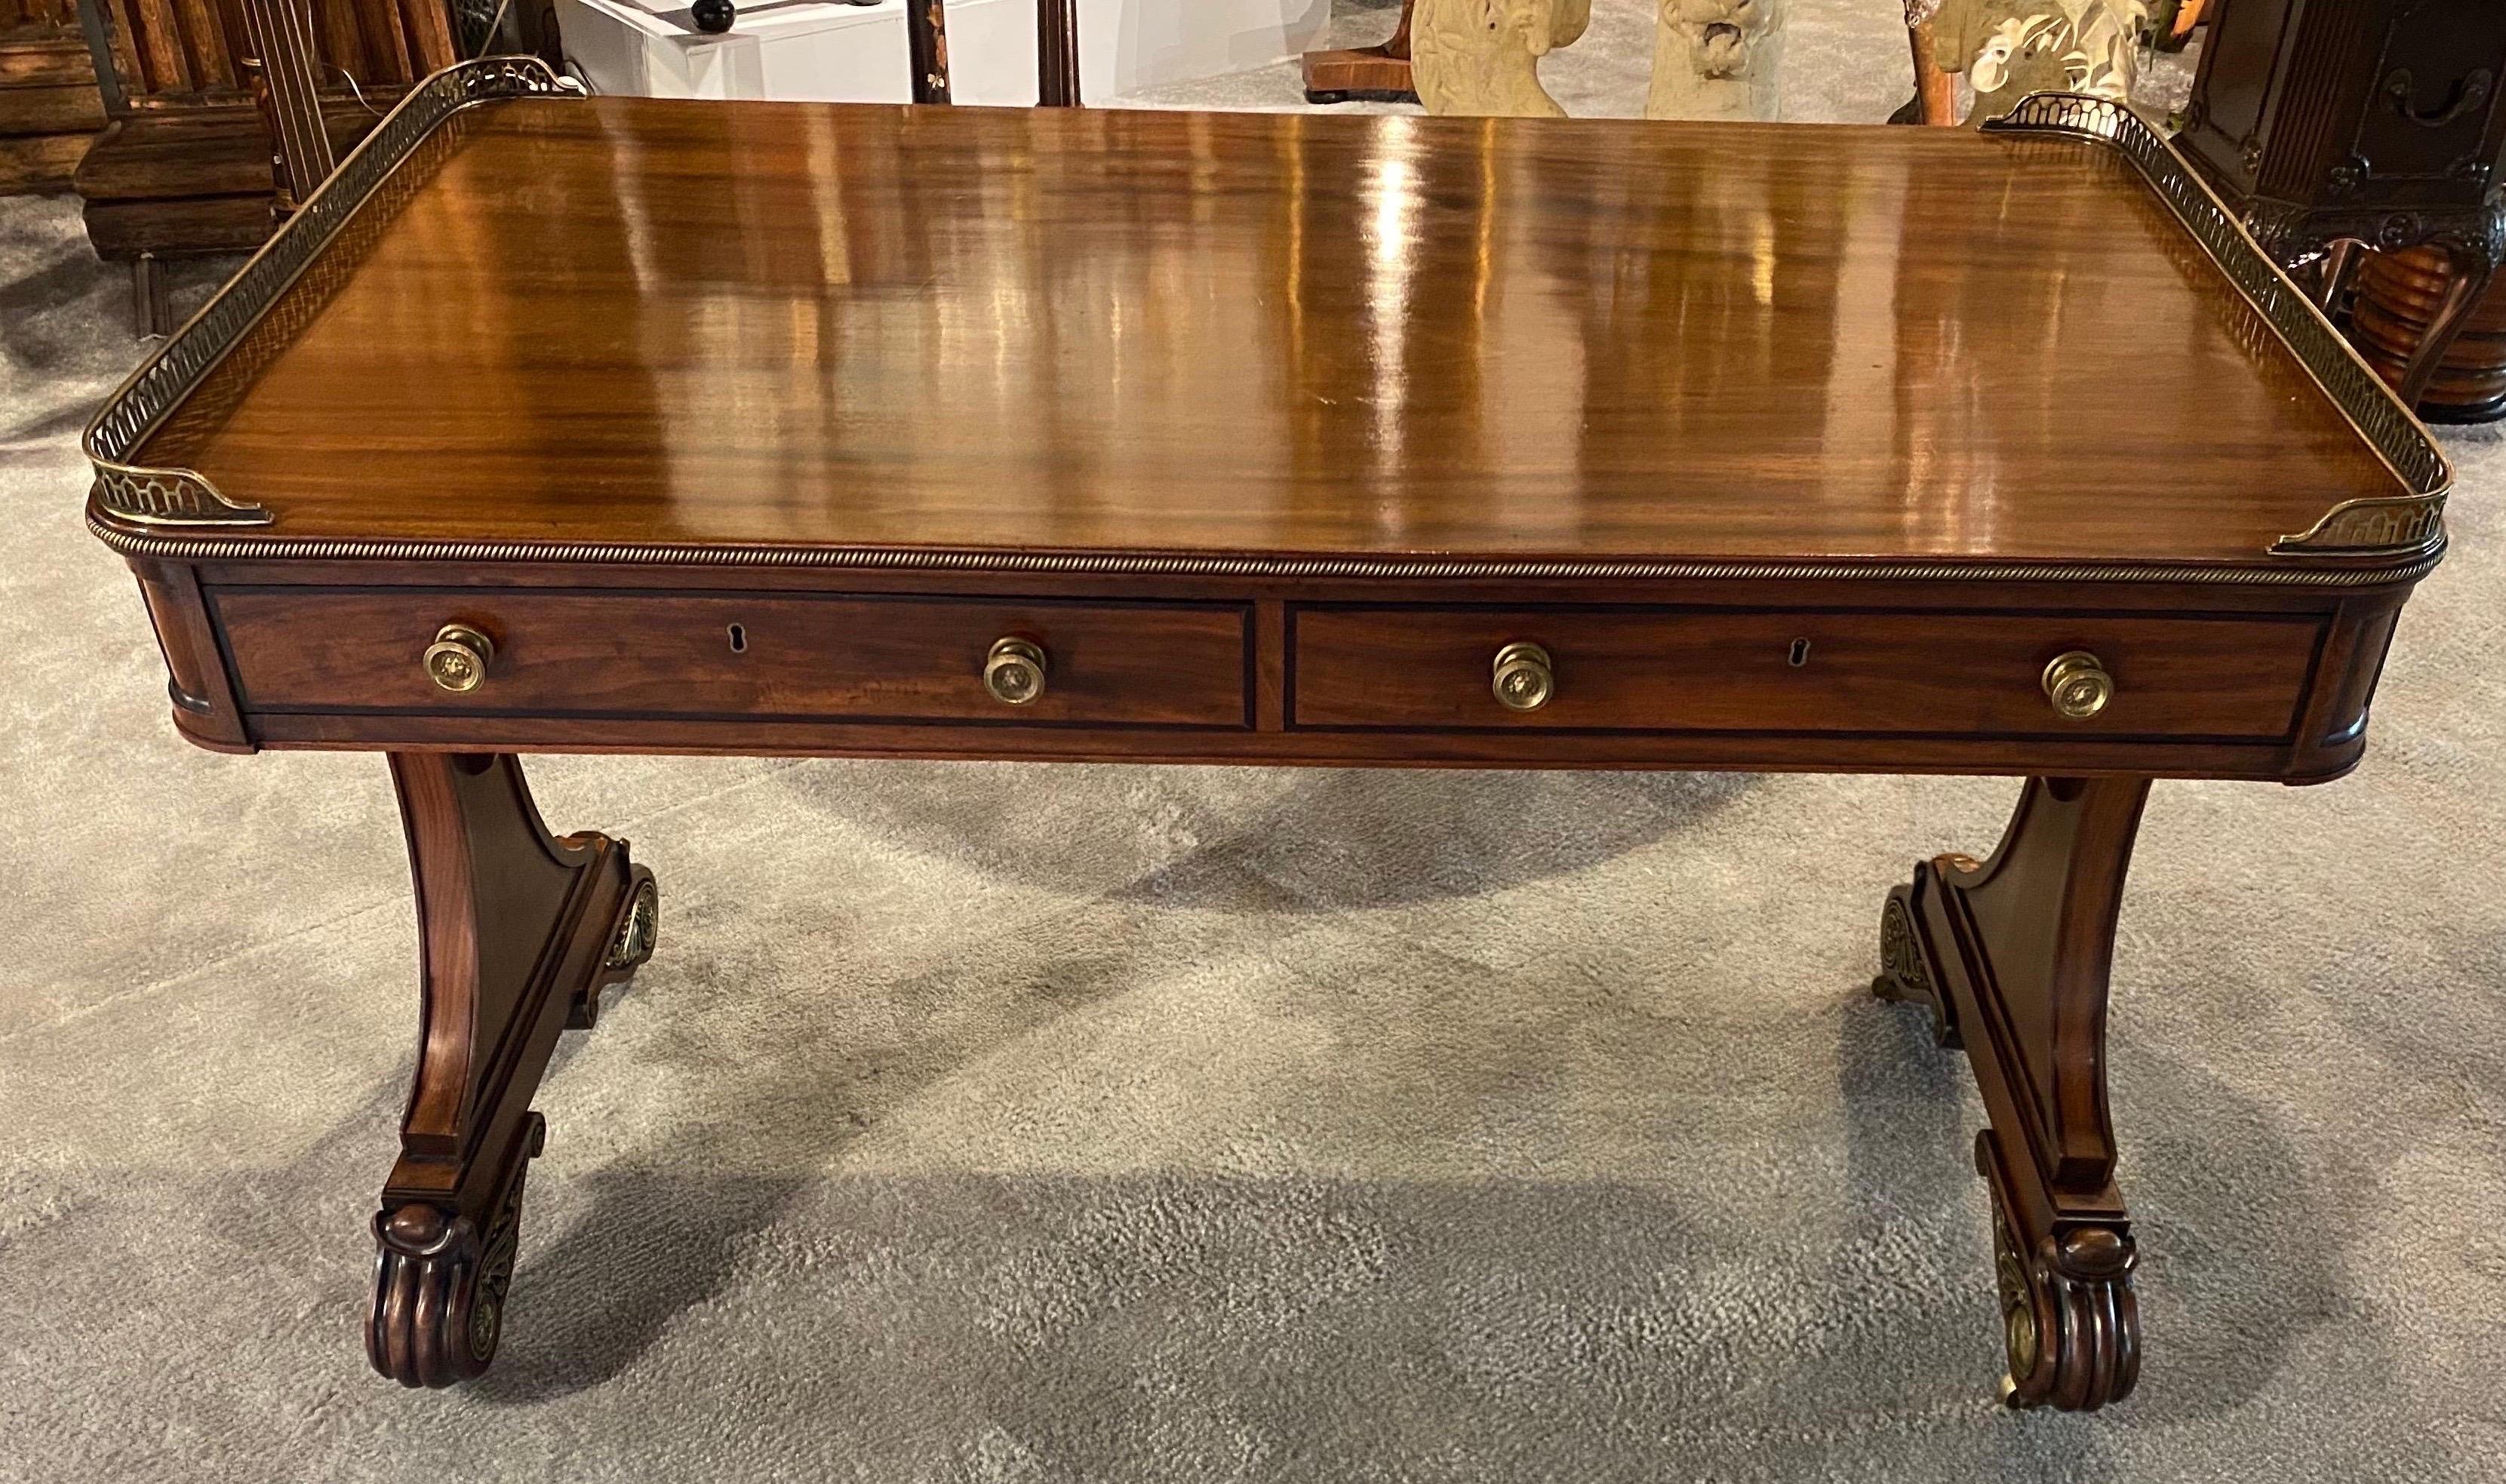 Very fine English Regency bronze mounted mahogany writing table. Single board top made of beautiful mahogany timber, with brass gallery flanking the sides atop of 2 mahogany lined drawers. The legs terminate into fully developed regency feet with